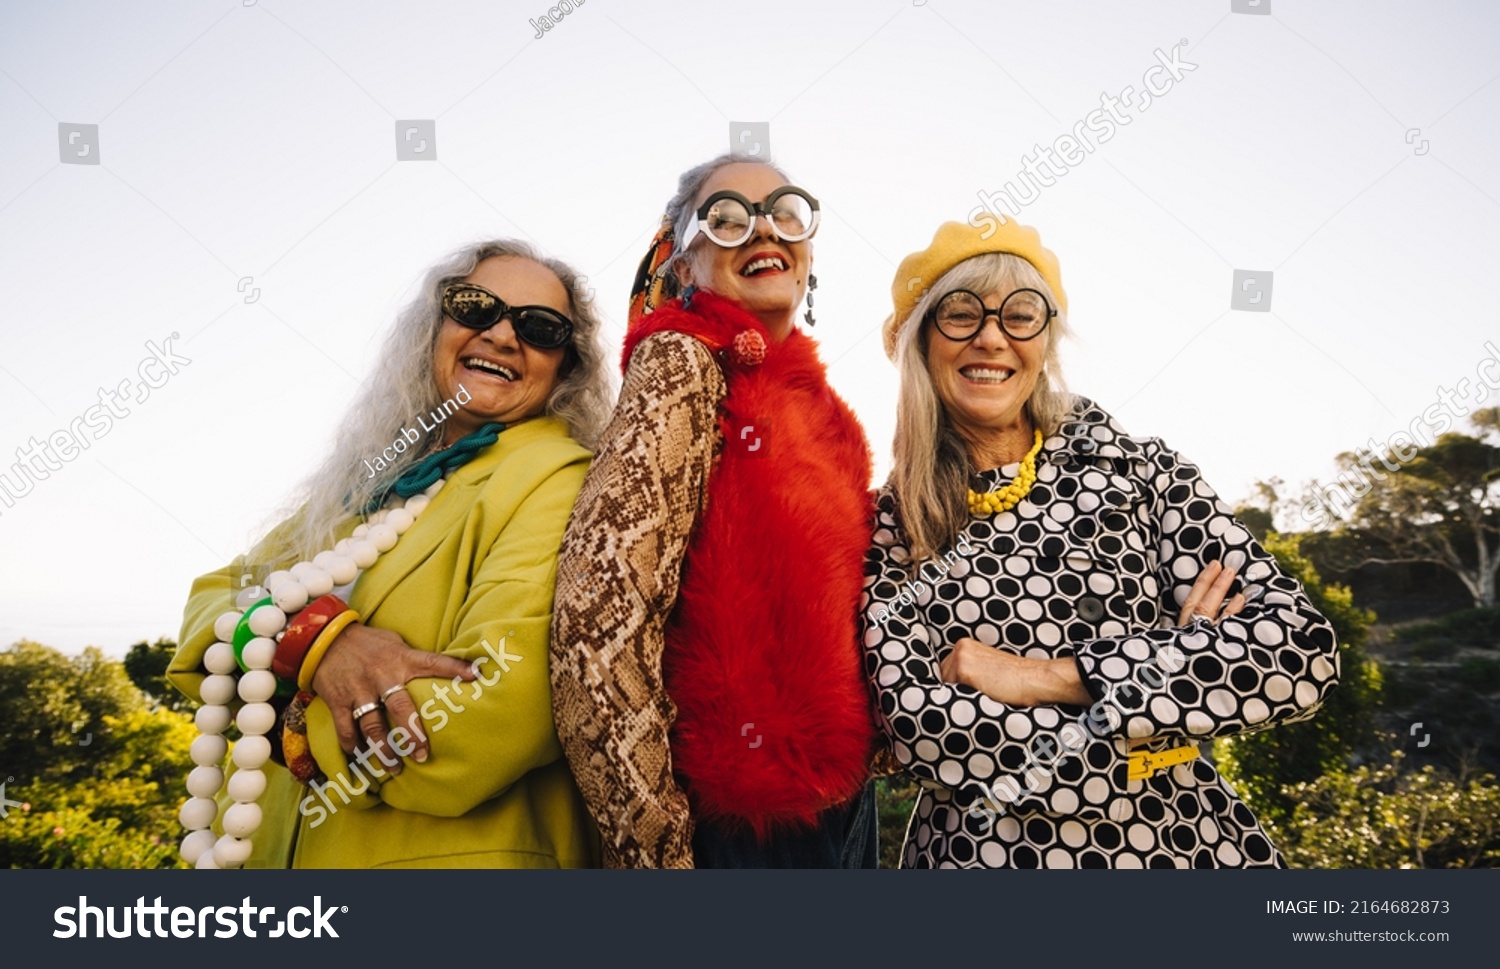 Stylish senior women smiling at the camera while standing together in a park. Group of confident elderly women wearing colourful casual clothing. Three mature women enjoying their golden years. #2164682873